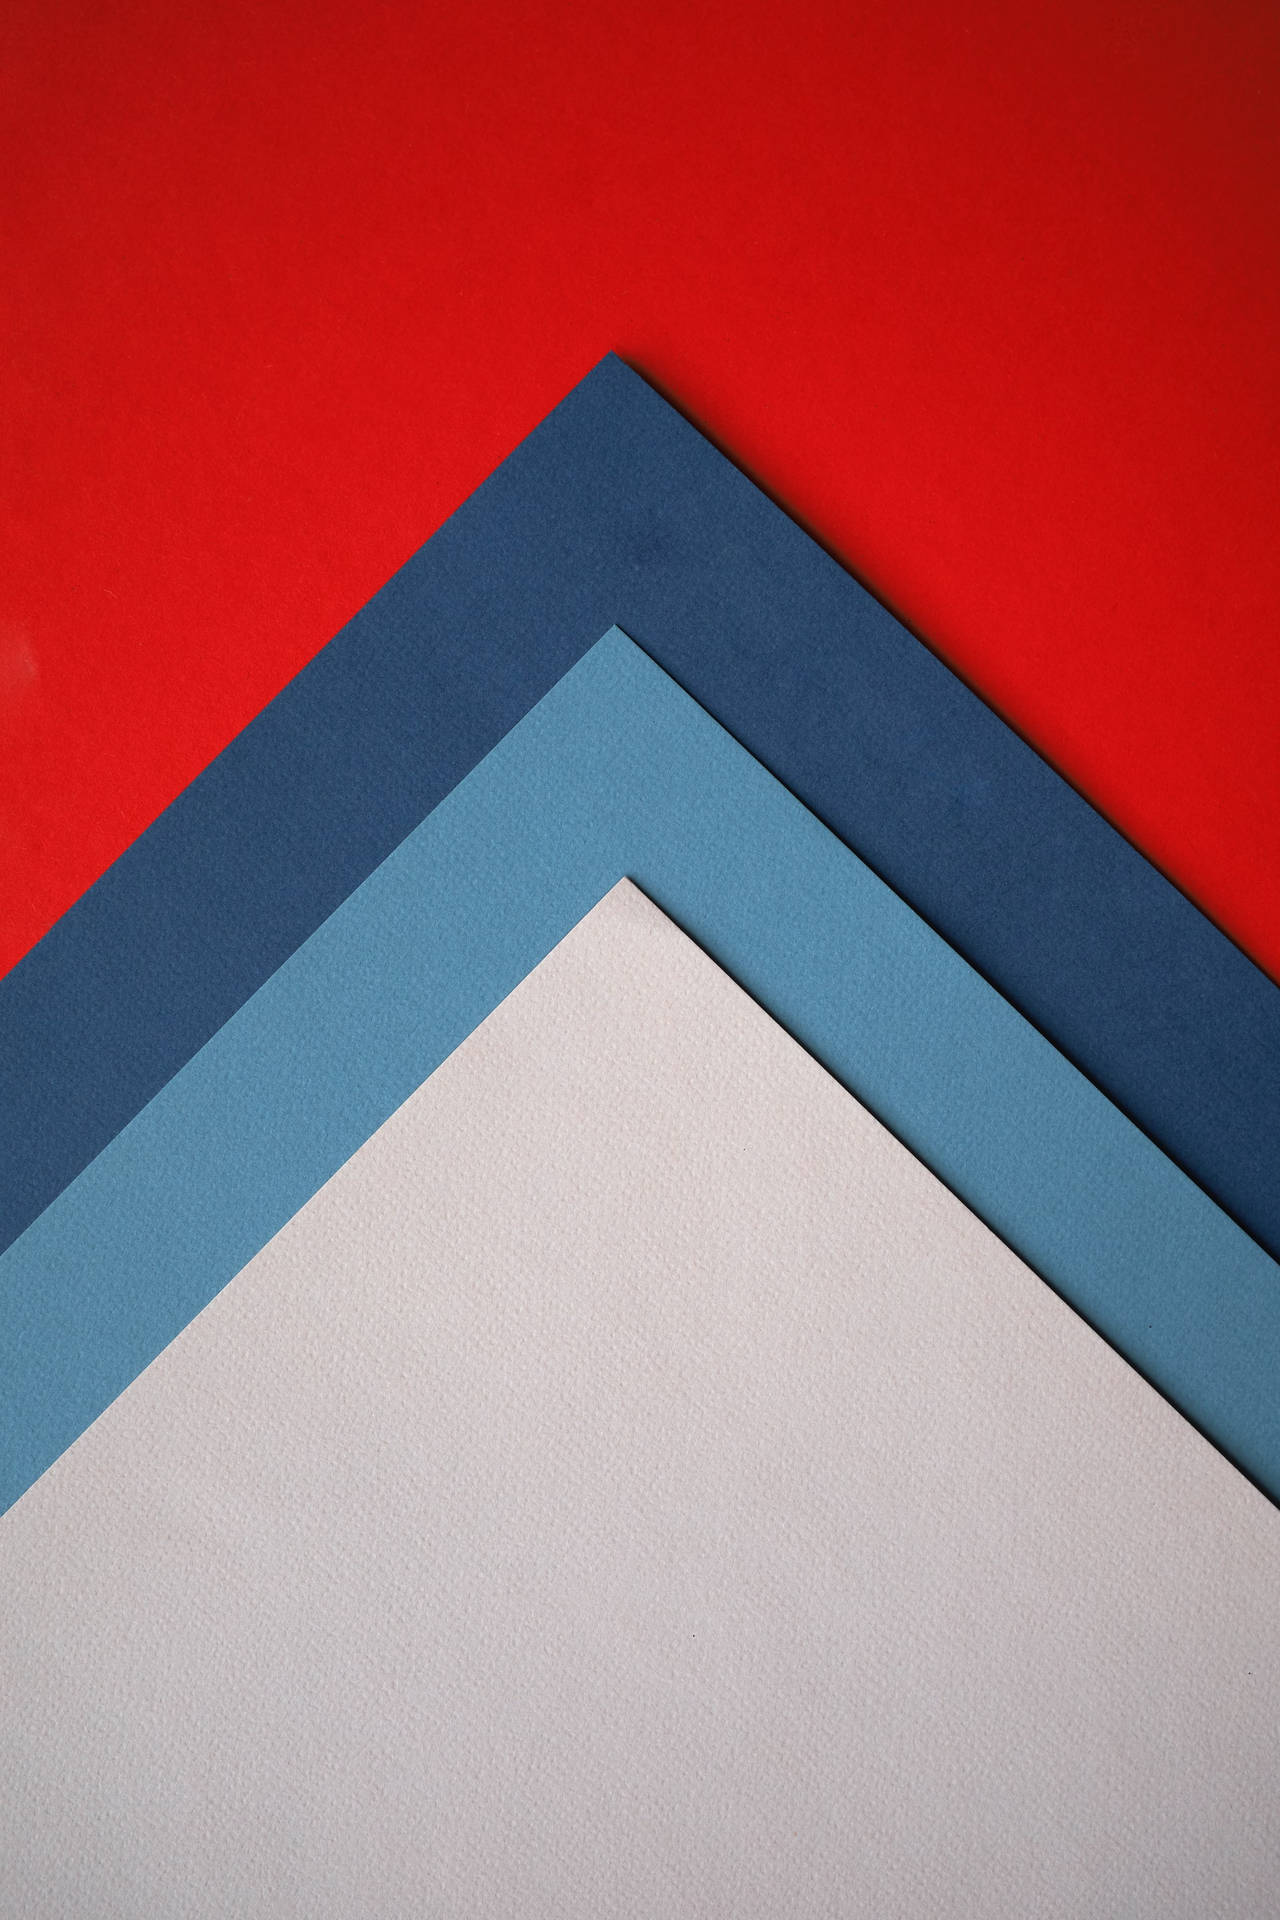 Triangles Layered Tip For Lenovo Tablet Screen Wallpaper